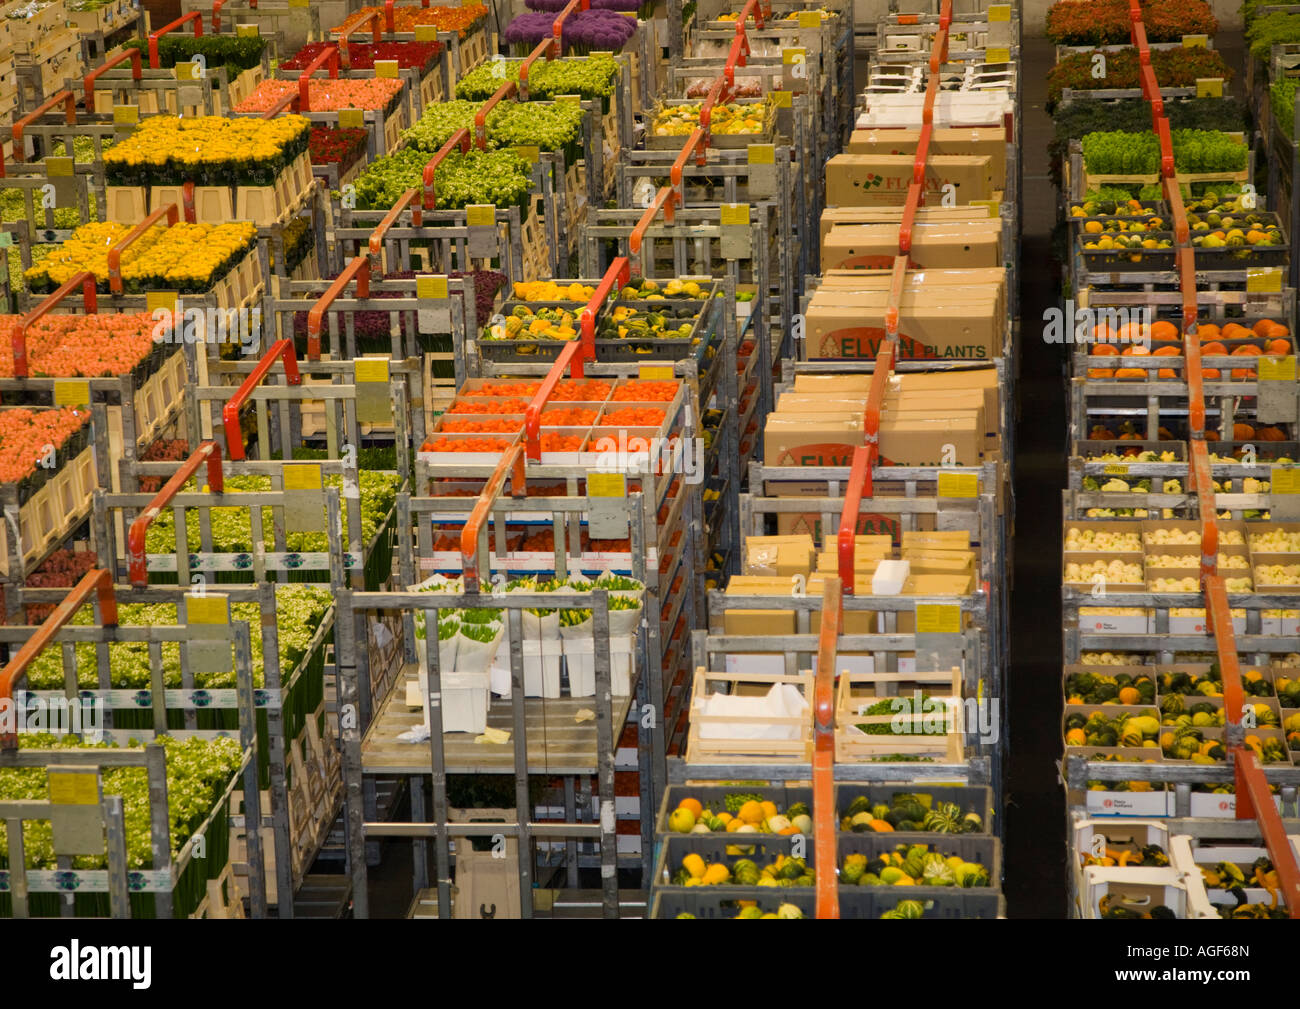 Plants and flowers being moved on trolleys at Aalsmeer Bloemenveiling Stock Photo